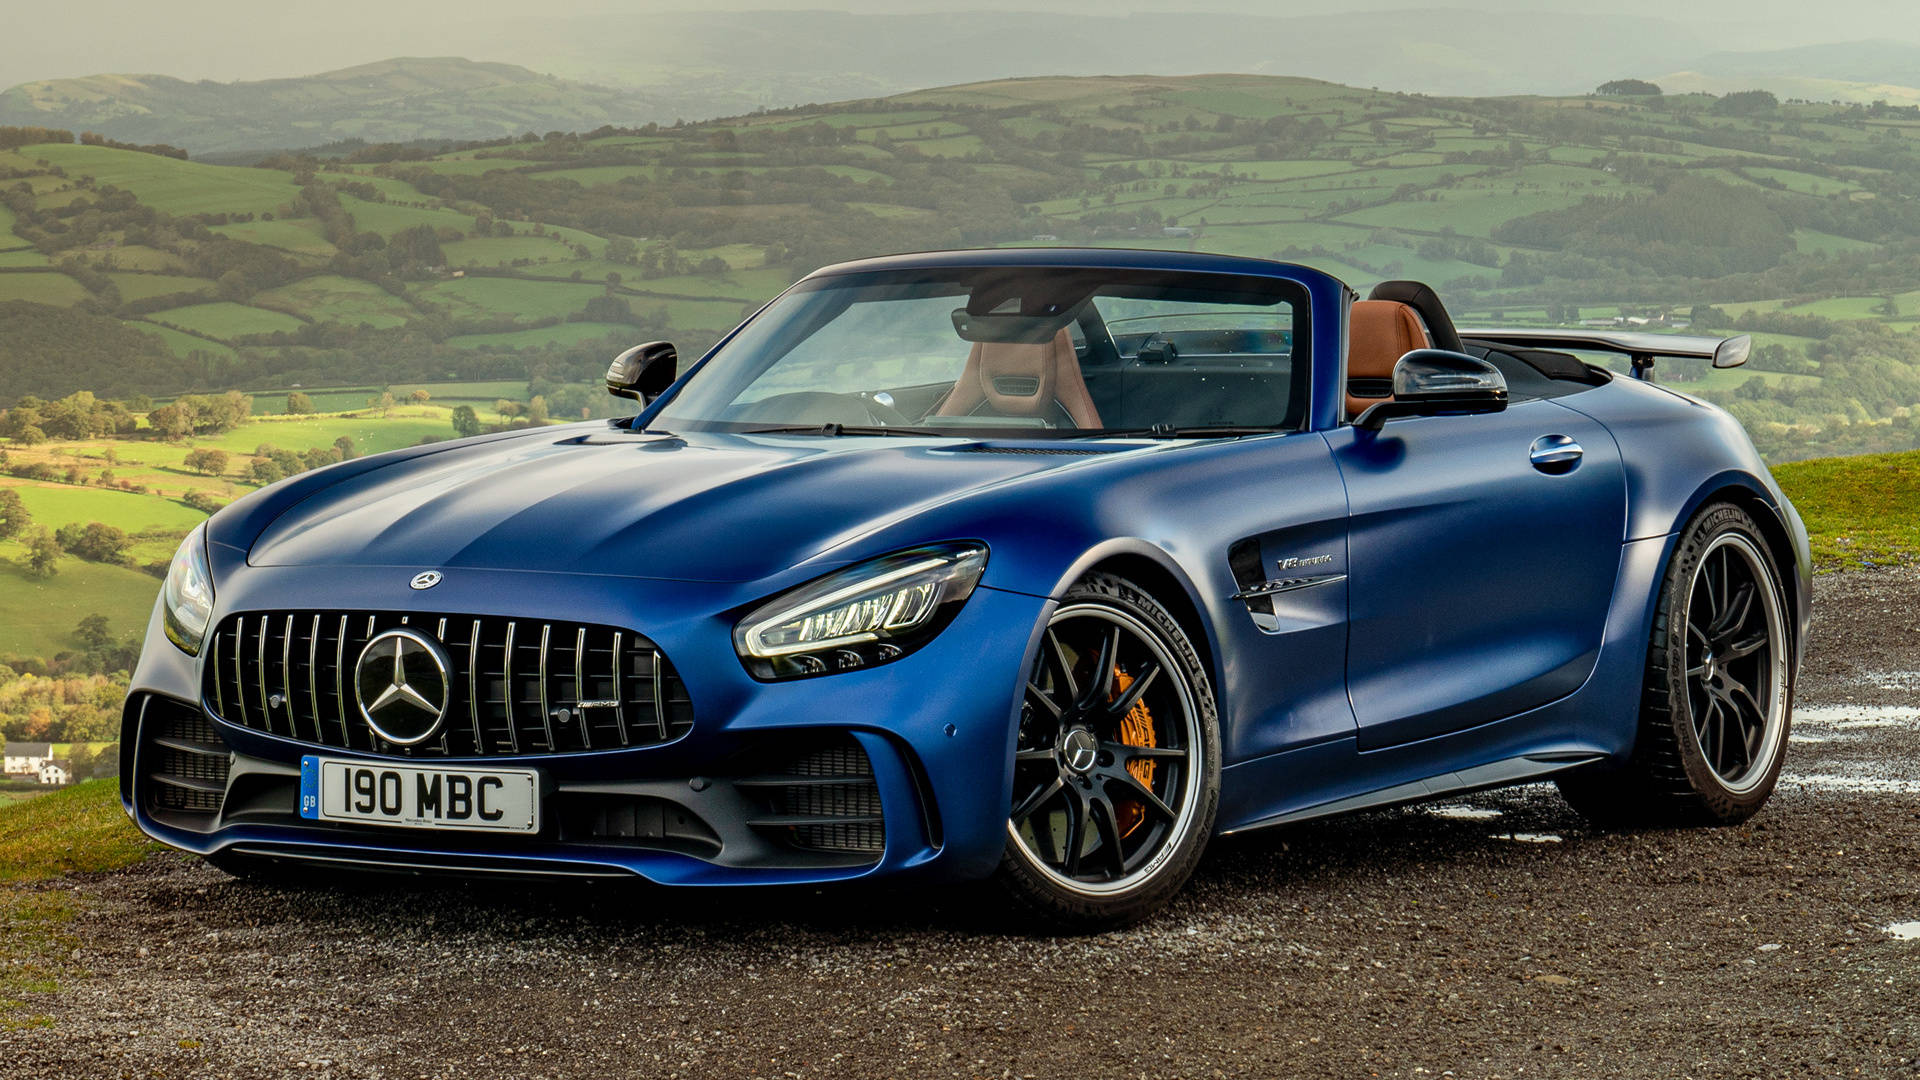 Amg Gtr Blue Convertible Background